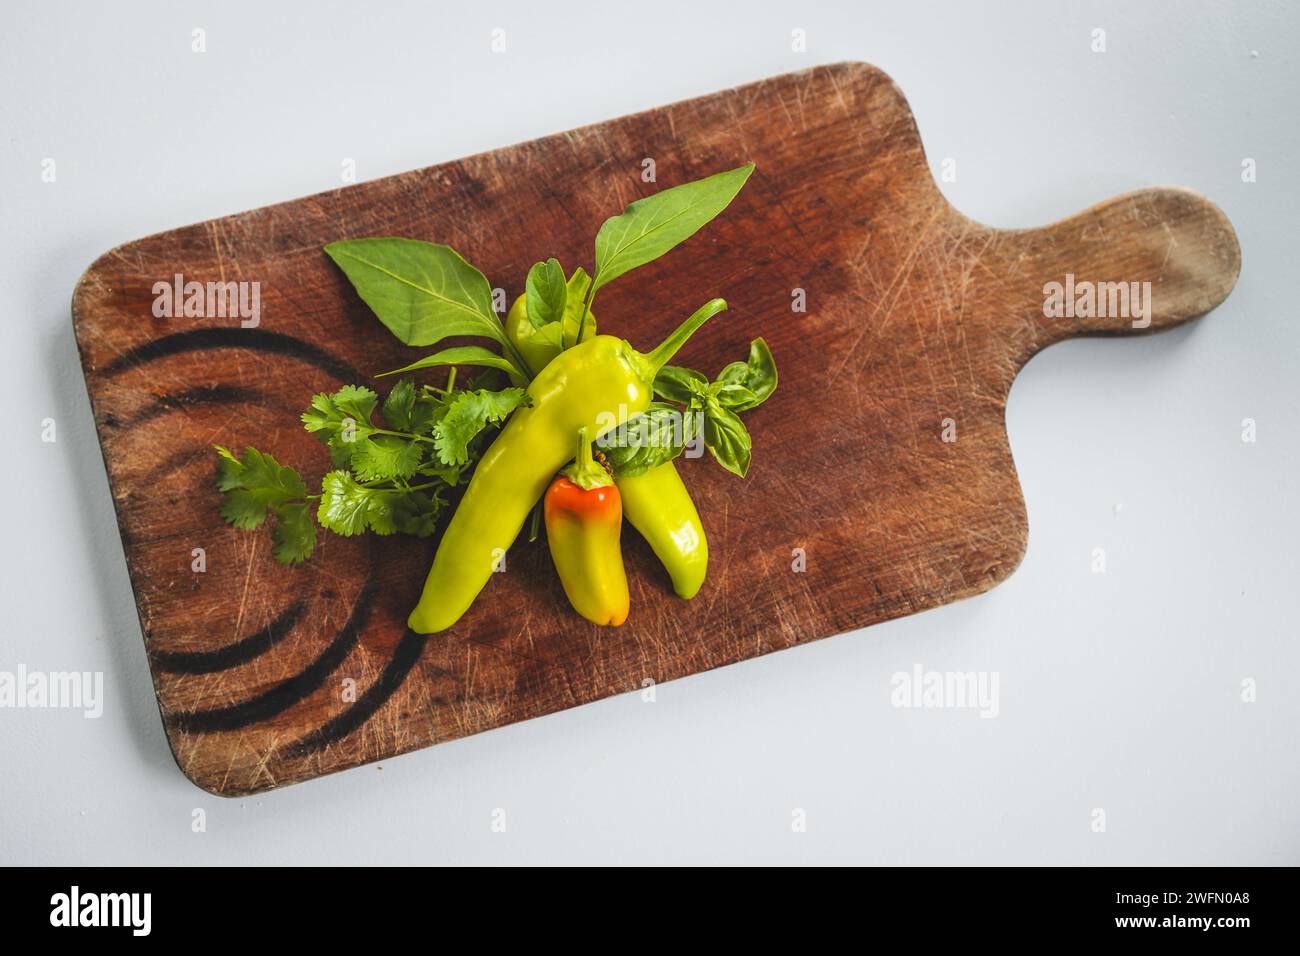 fresh chili peppers and herbs on rustic wooden cutting board, concept of simple natural healthy ingredients Stock Photo